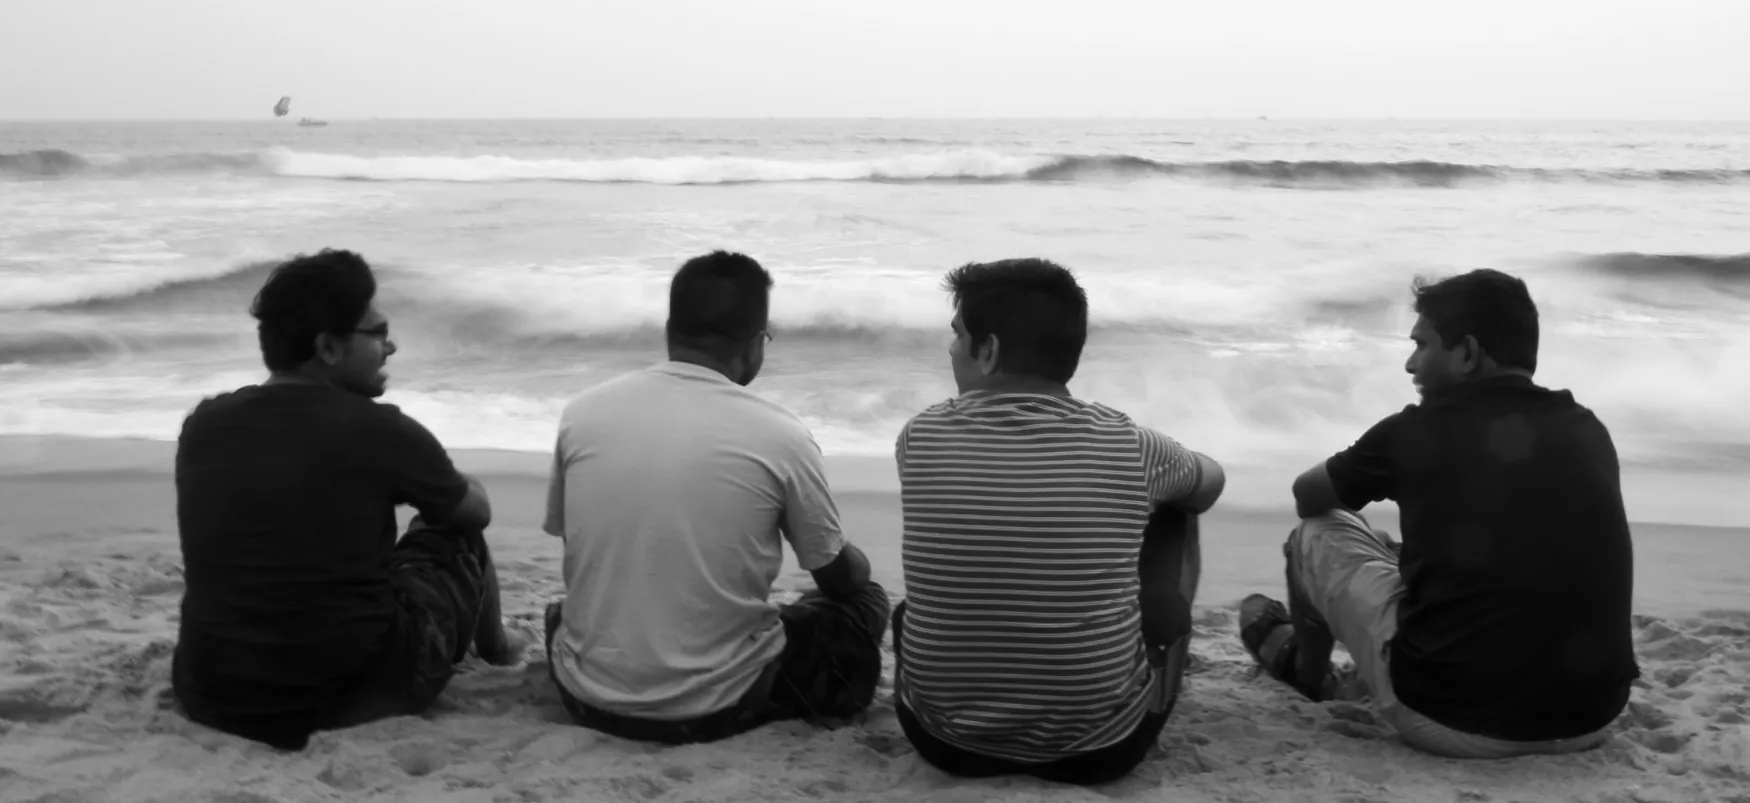 Four young people sit on the beach, engaged in conversation.